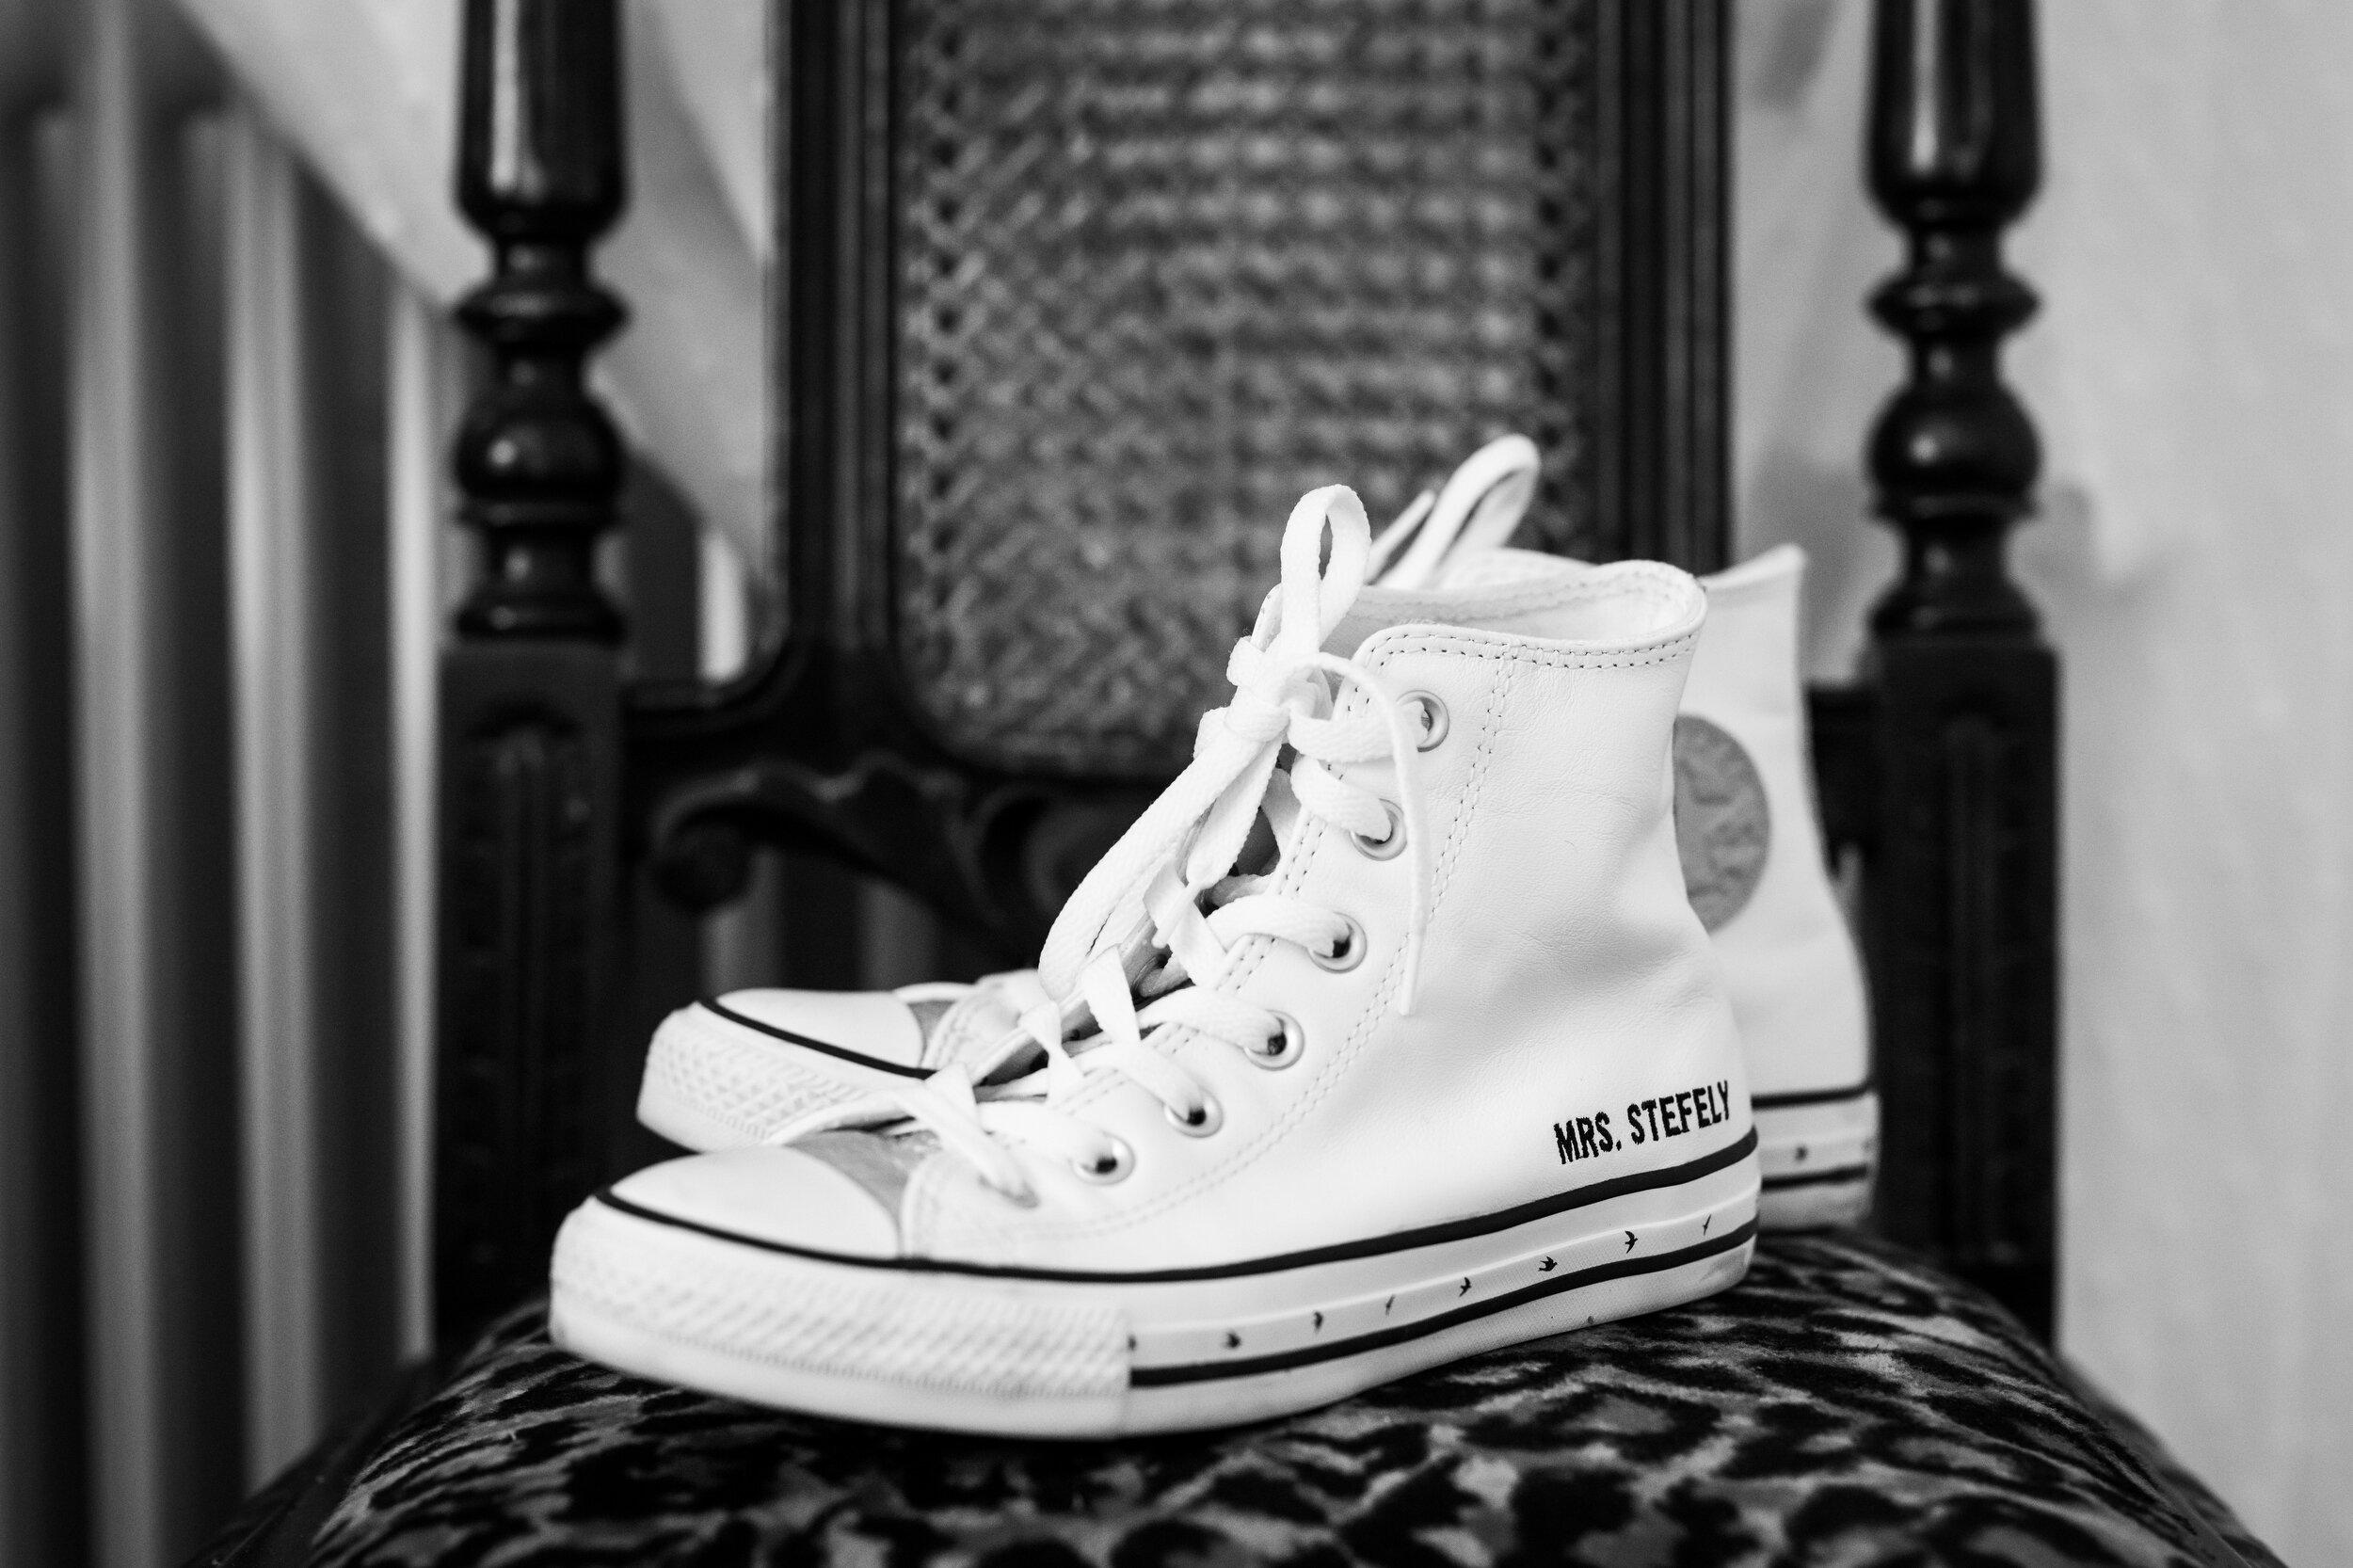 Monogrammed converse sneakers for the bride: destination wedding photo at the Lost Unicorn Hotel, Tsagarada, Greece by J. Brown Photography.